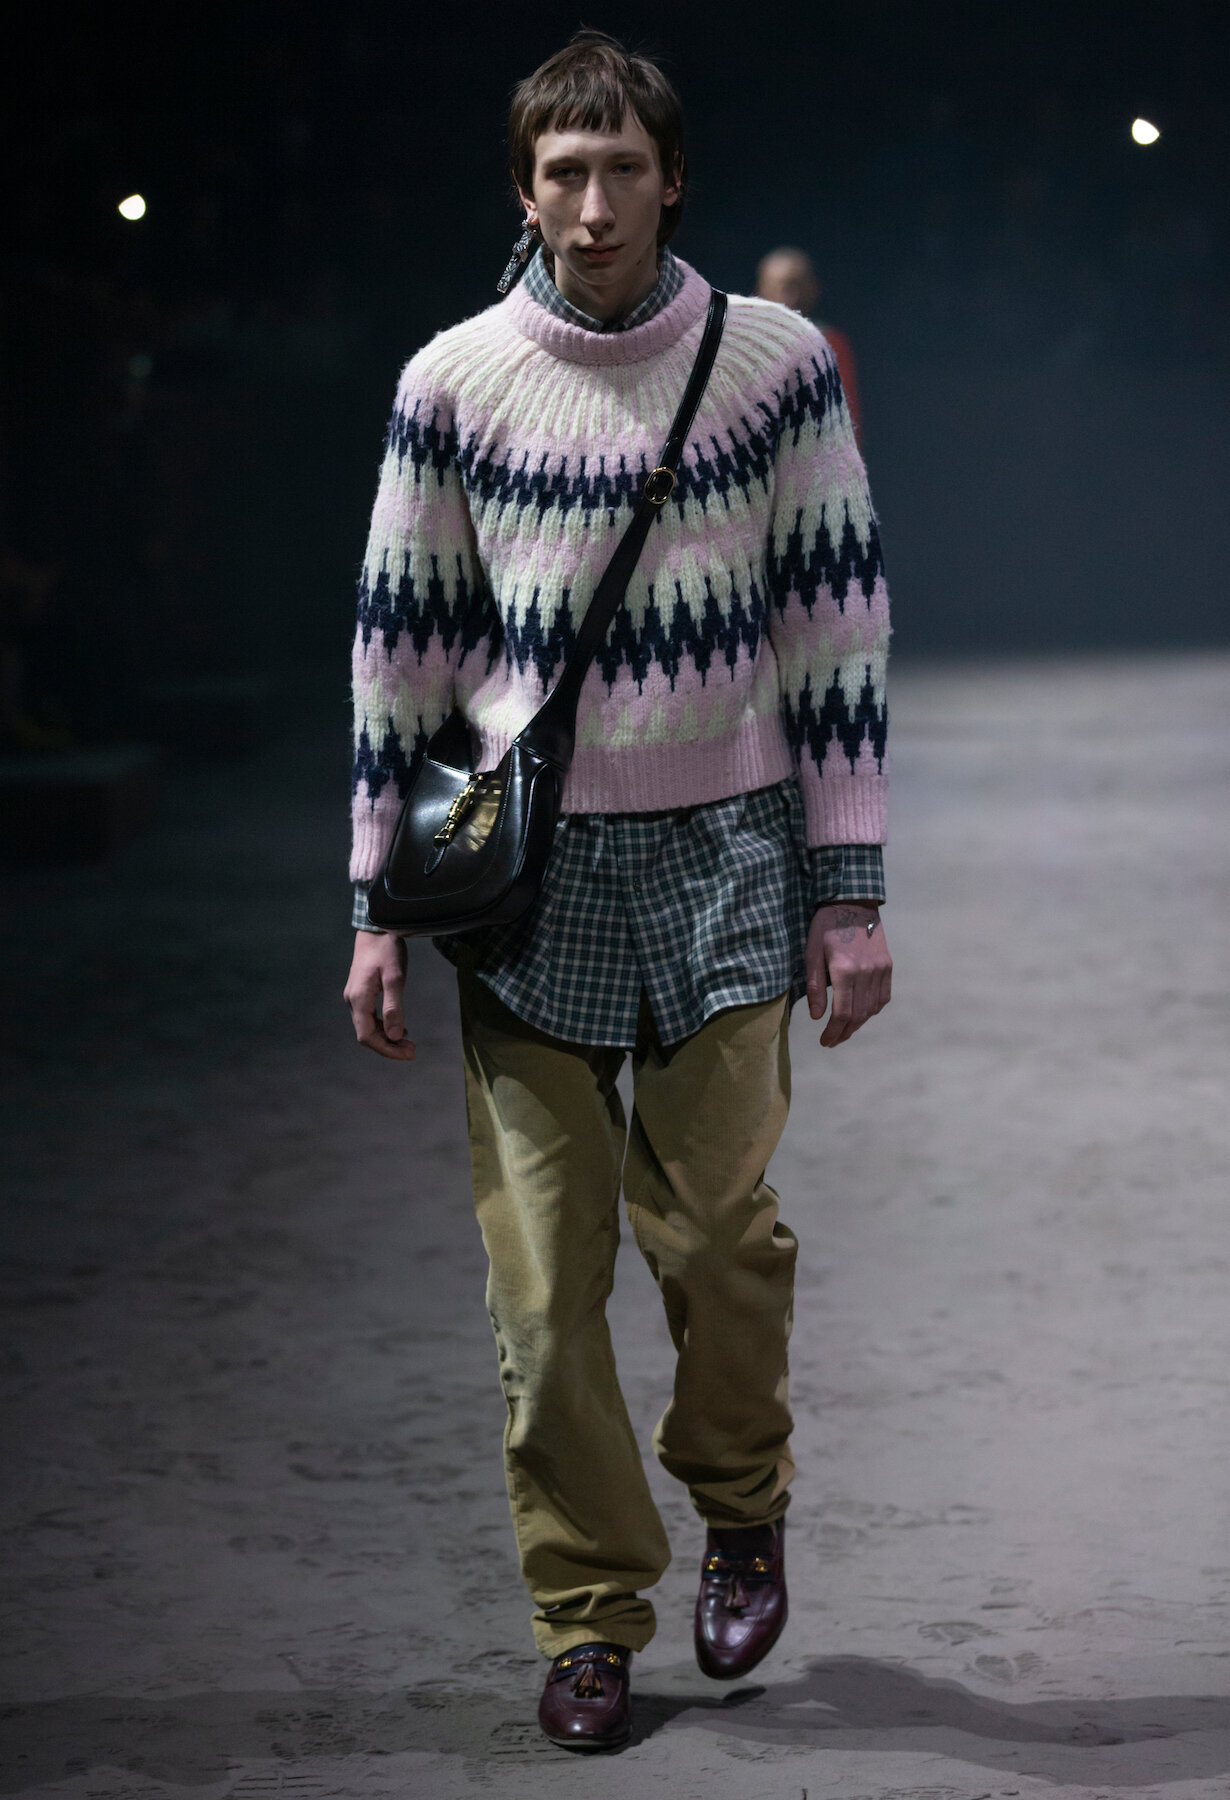 Gucci Fall Winter 2020 Men_s Collection (Look 8).jpg